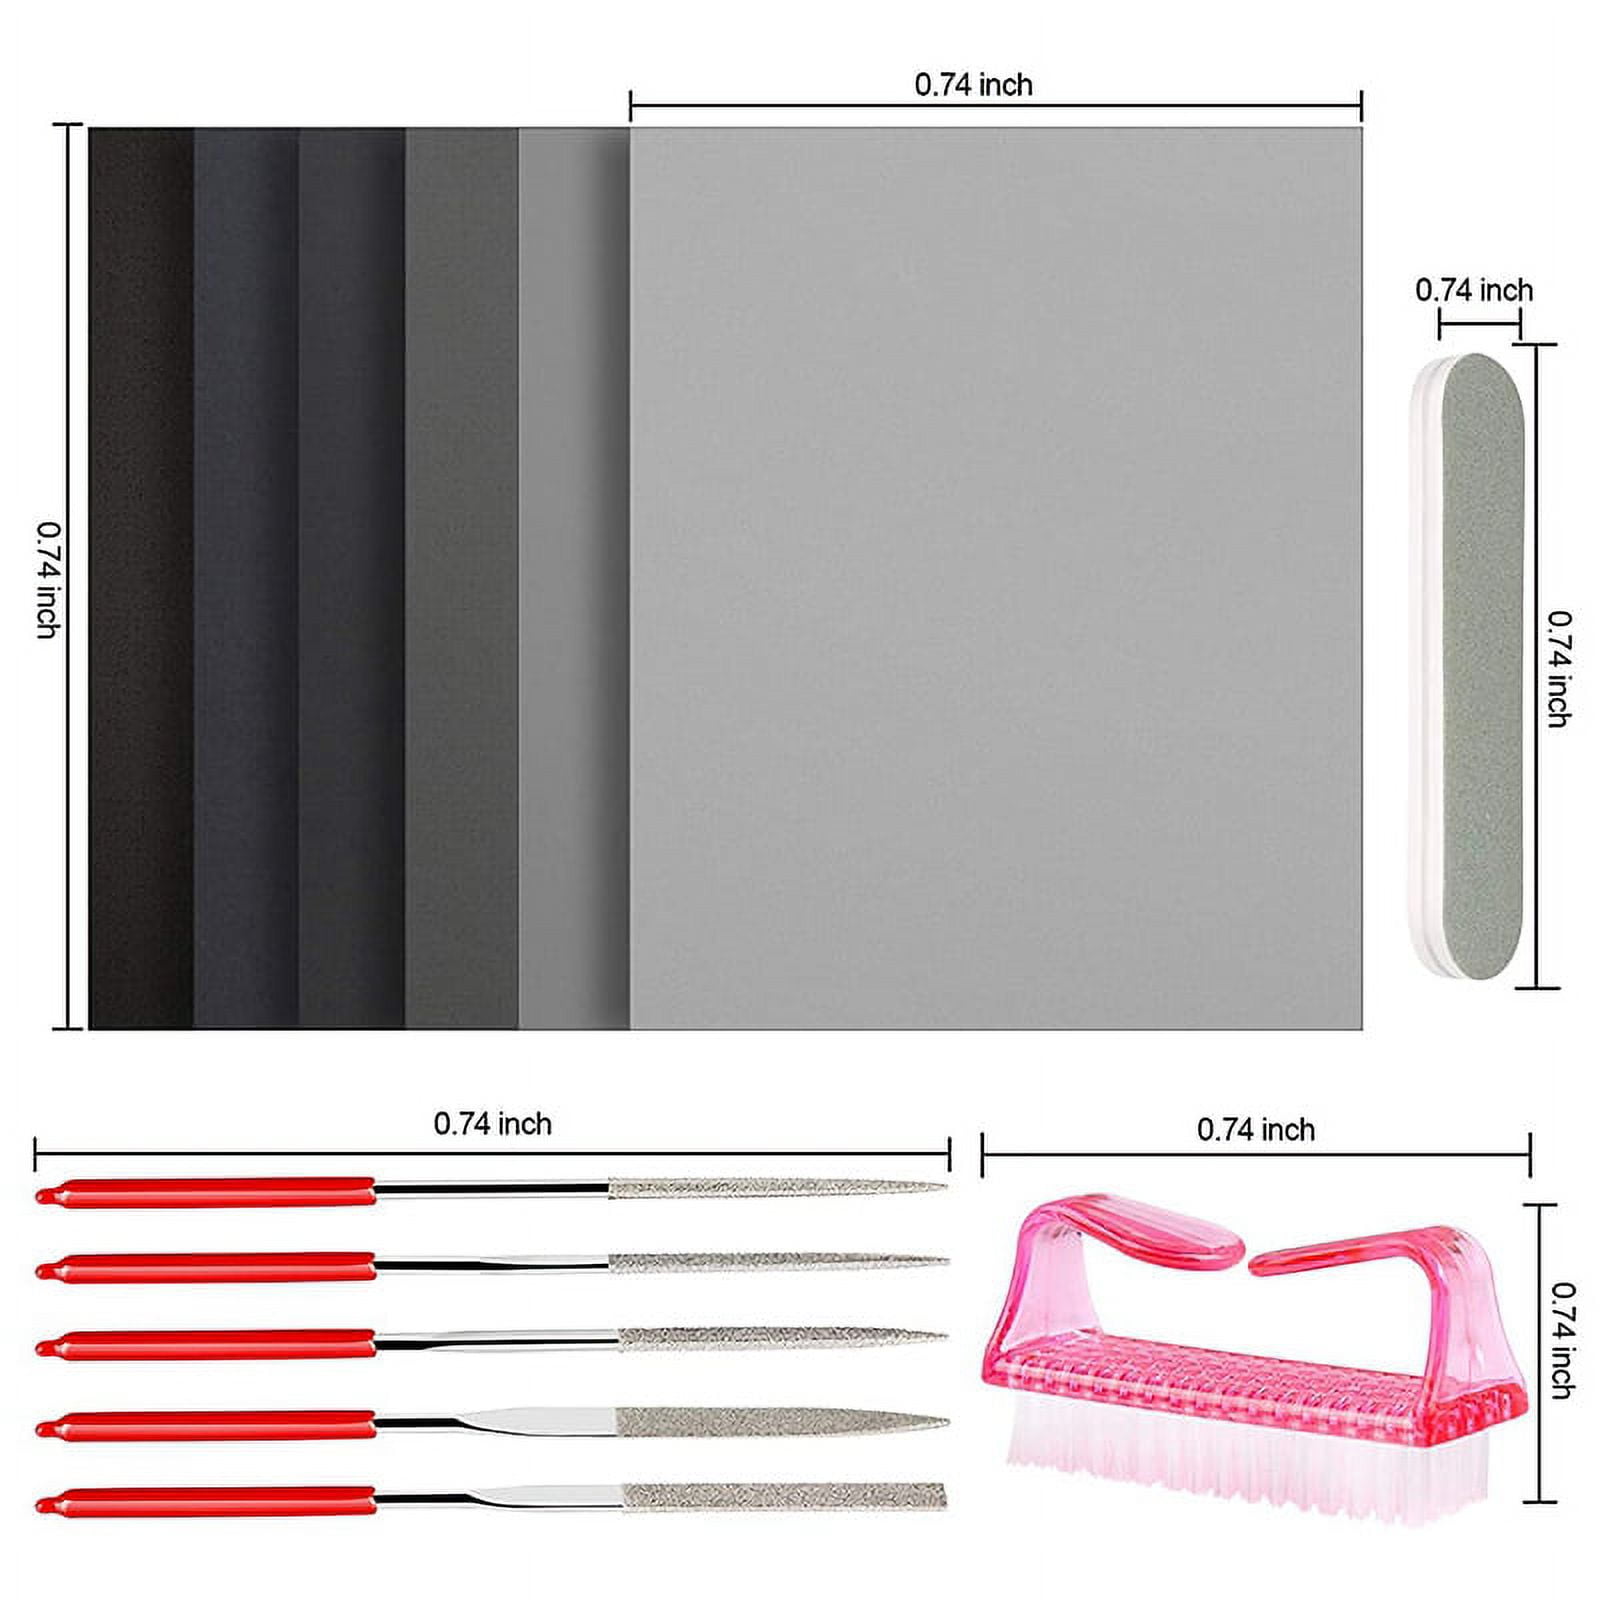 15 Pieces Resin Casting Tools Set - Include Sand Papers, Polishing Blocks,  Polishing Cloth, Round File, Semicircular File, Flat File and Scissors for